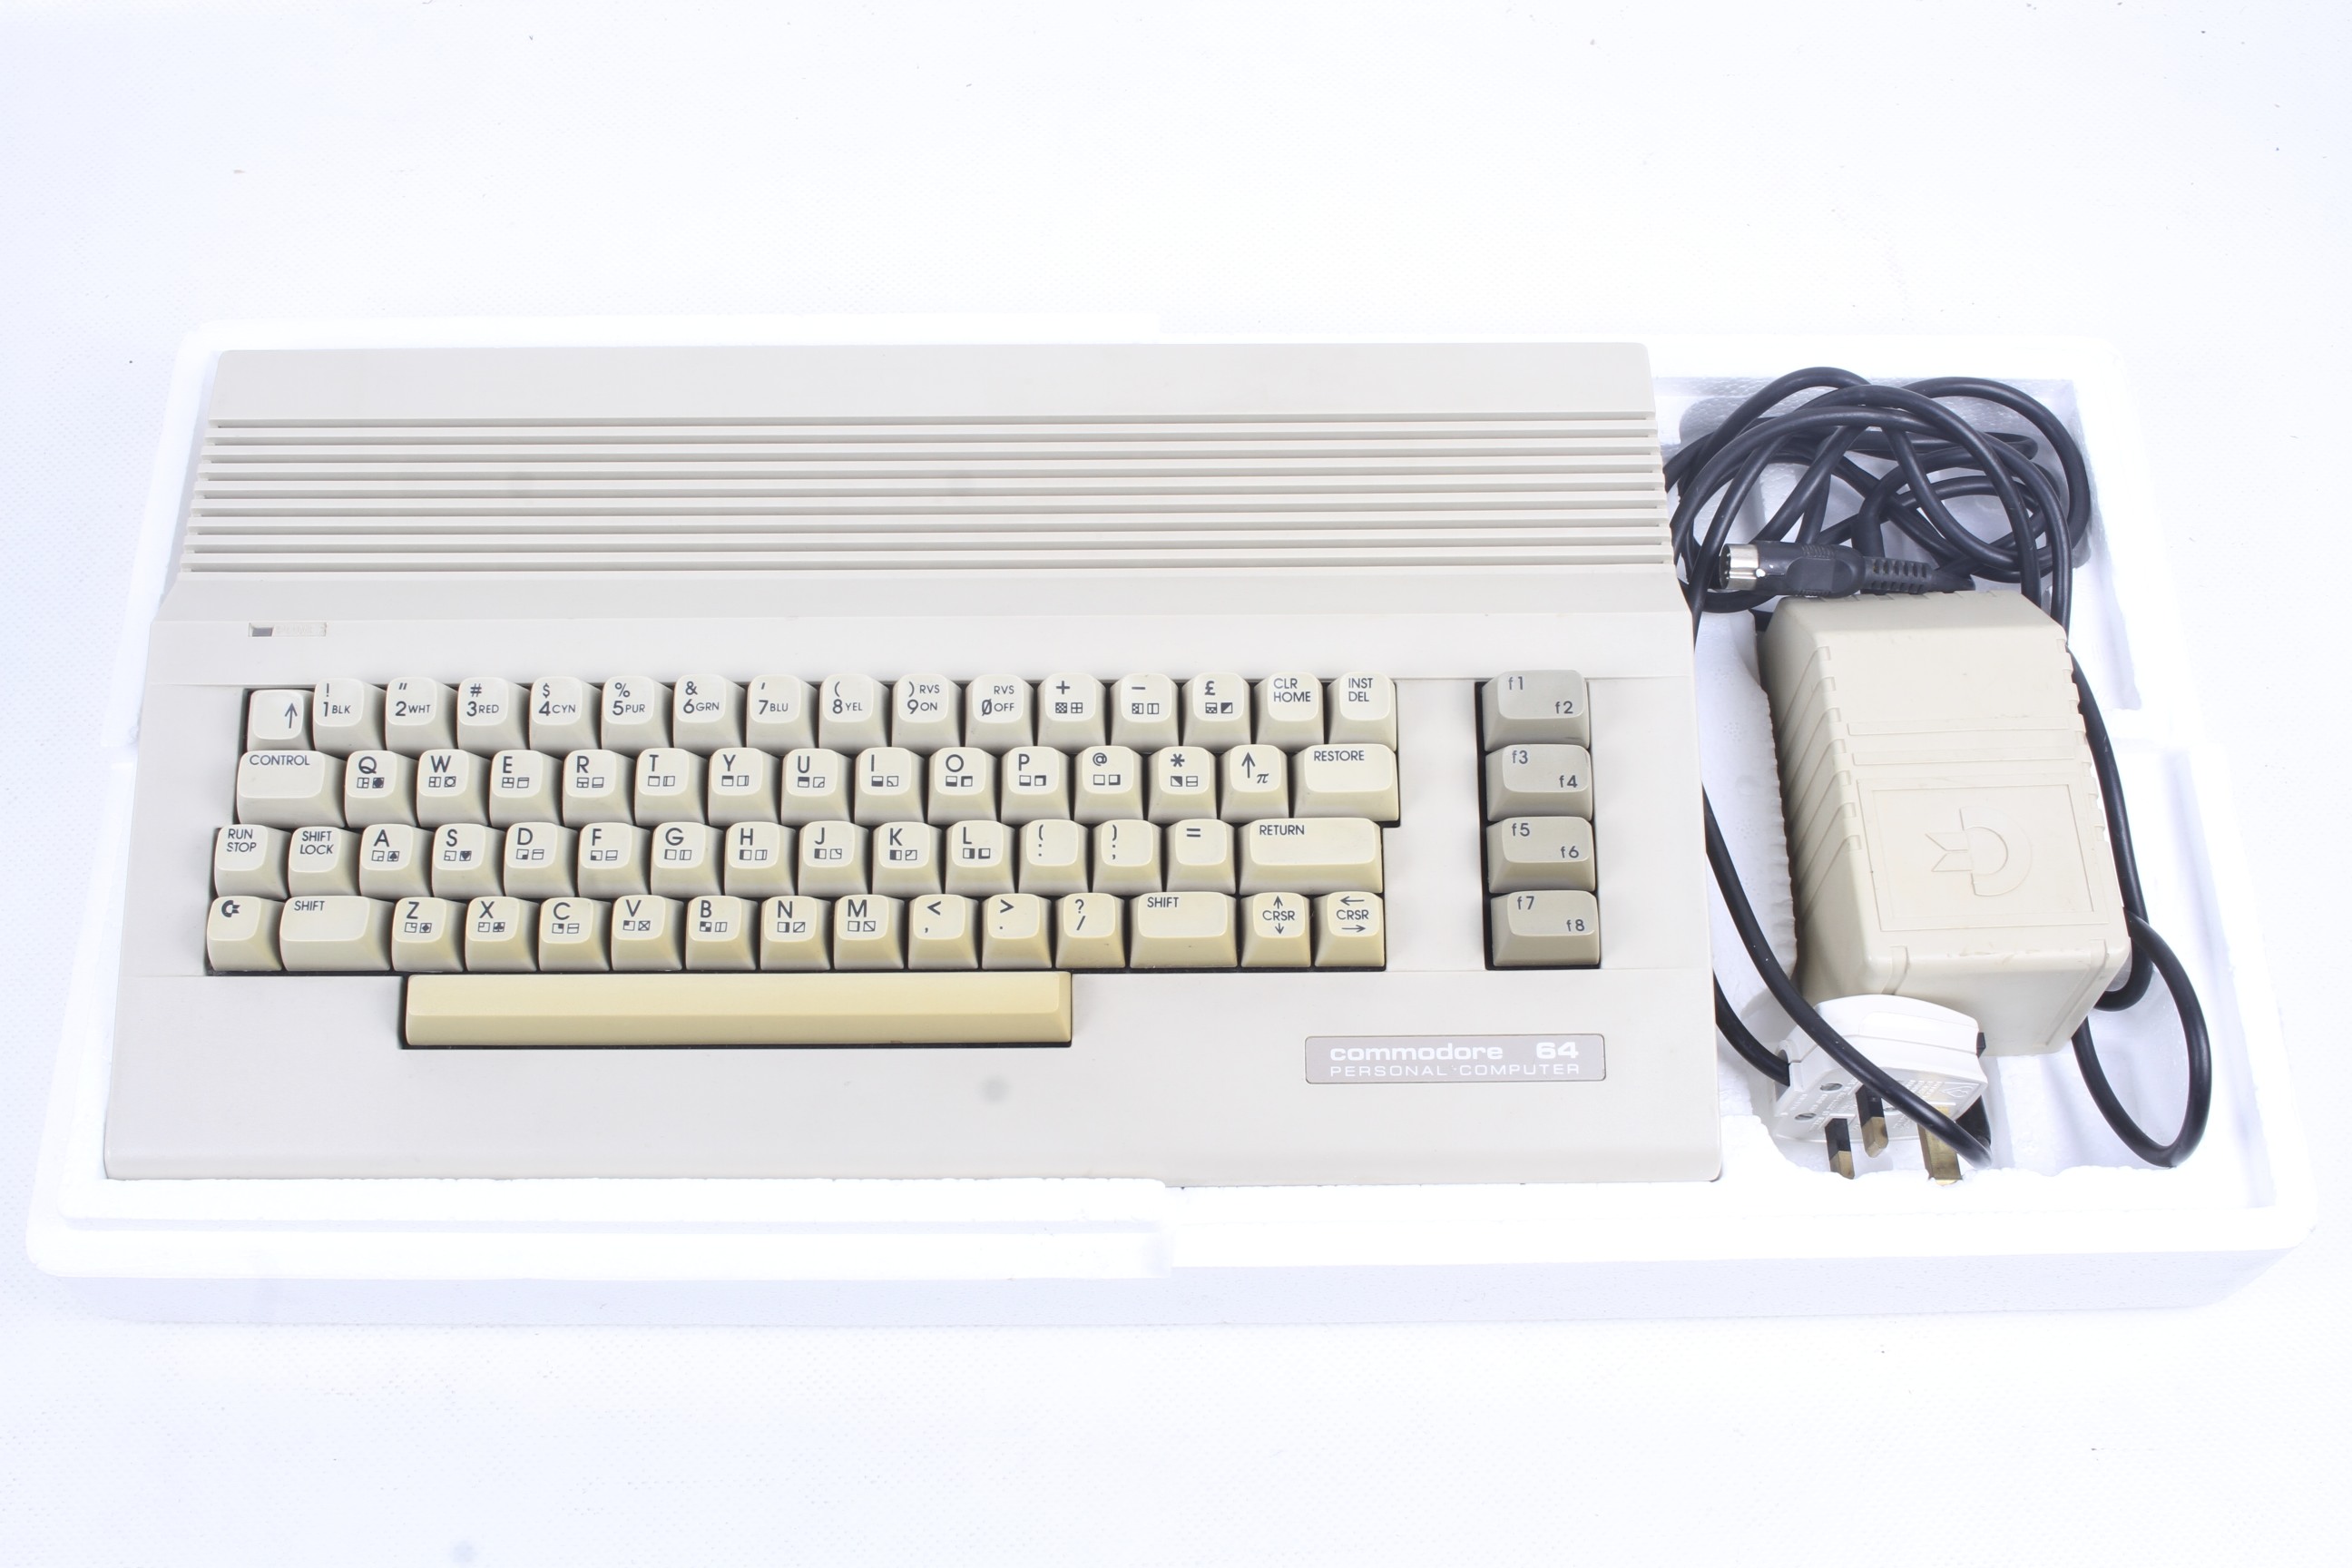 A Commodore 64 PC. Complete with leads etc, in original box. - Image 2 of 2